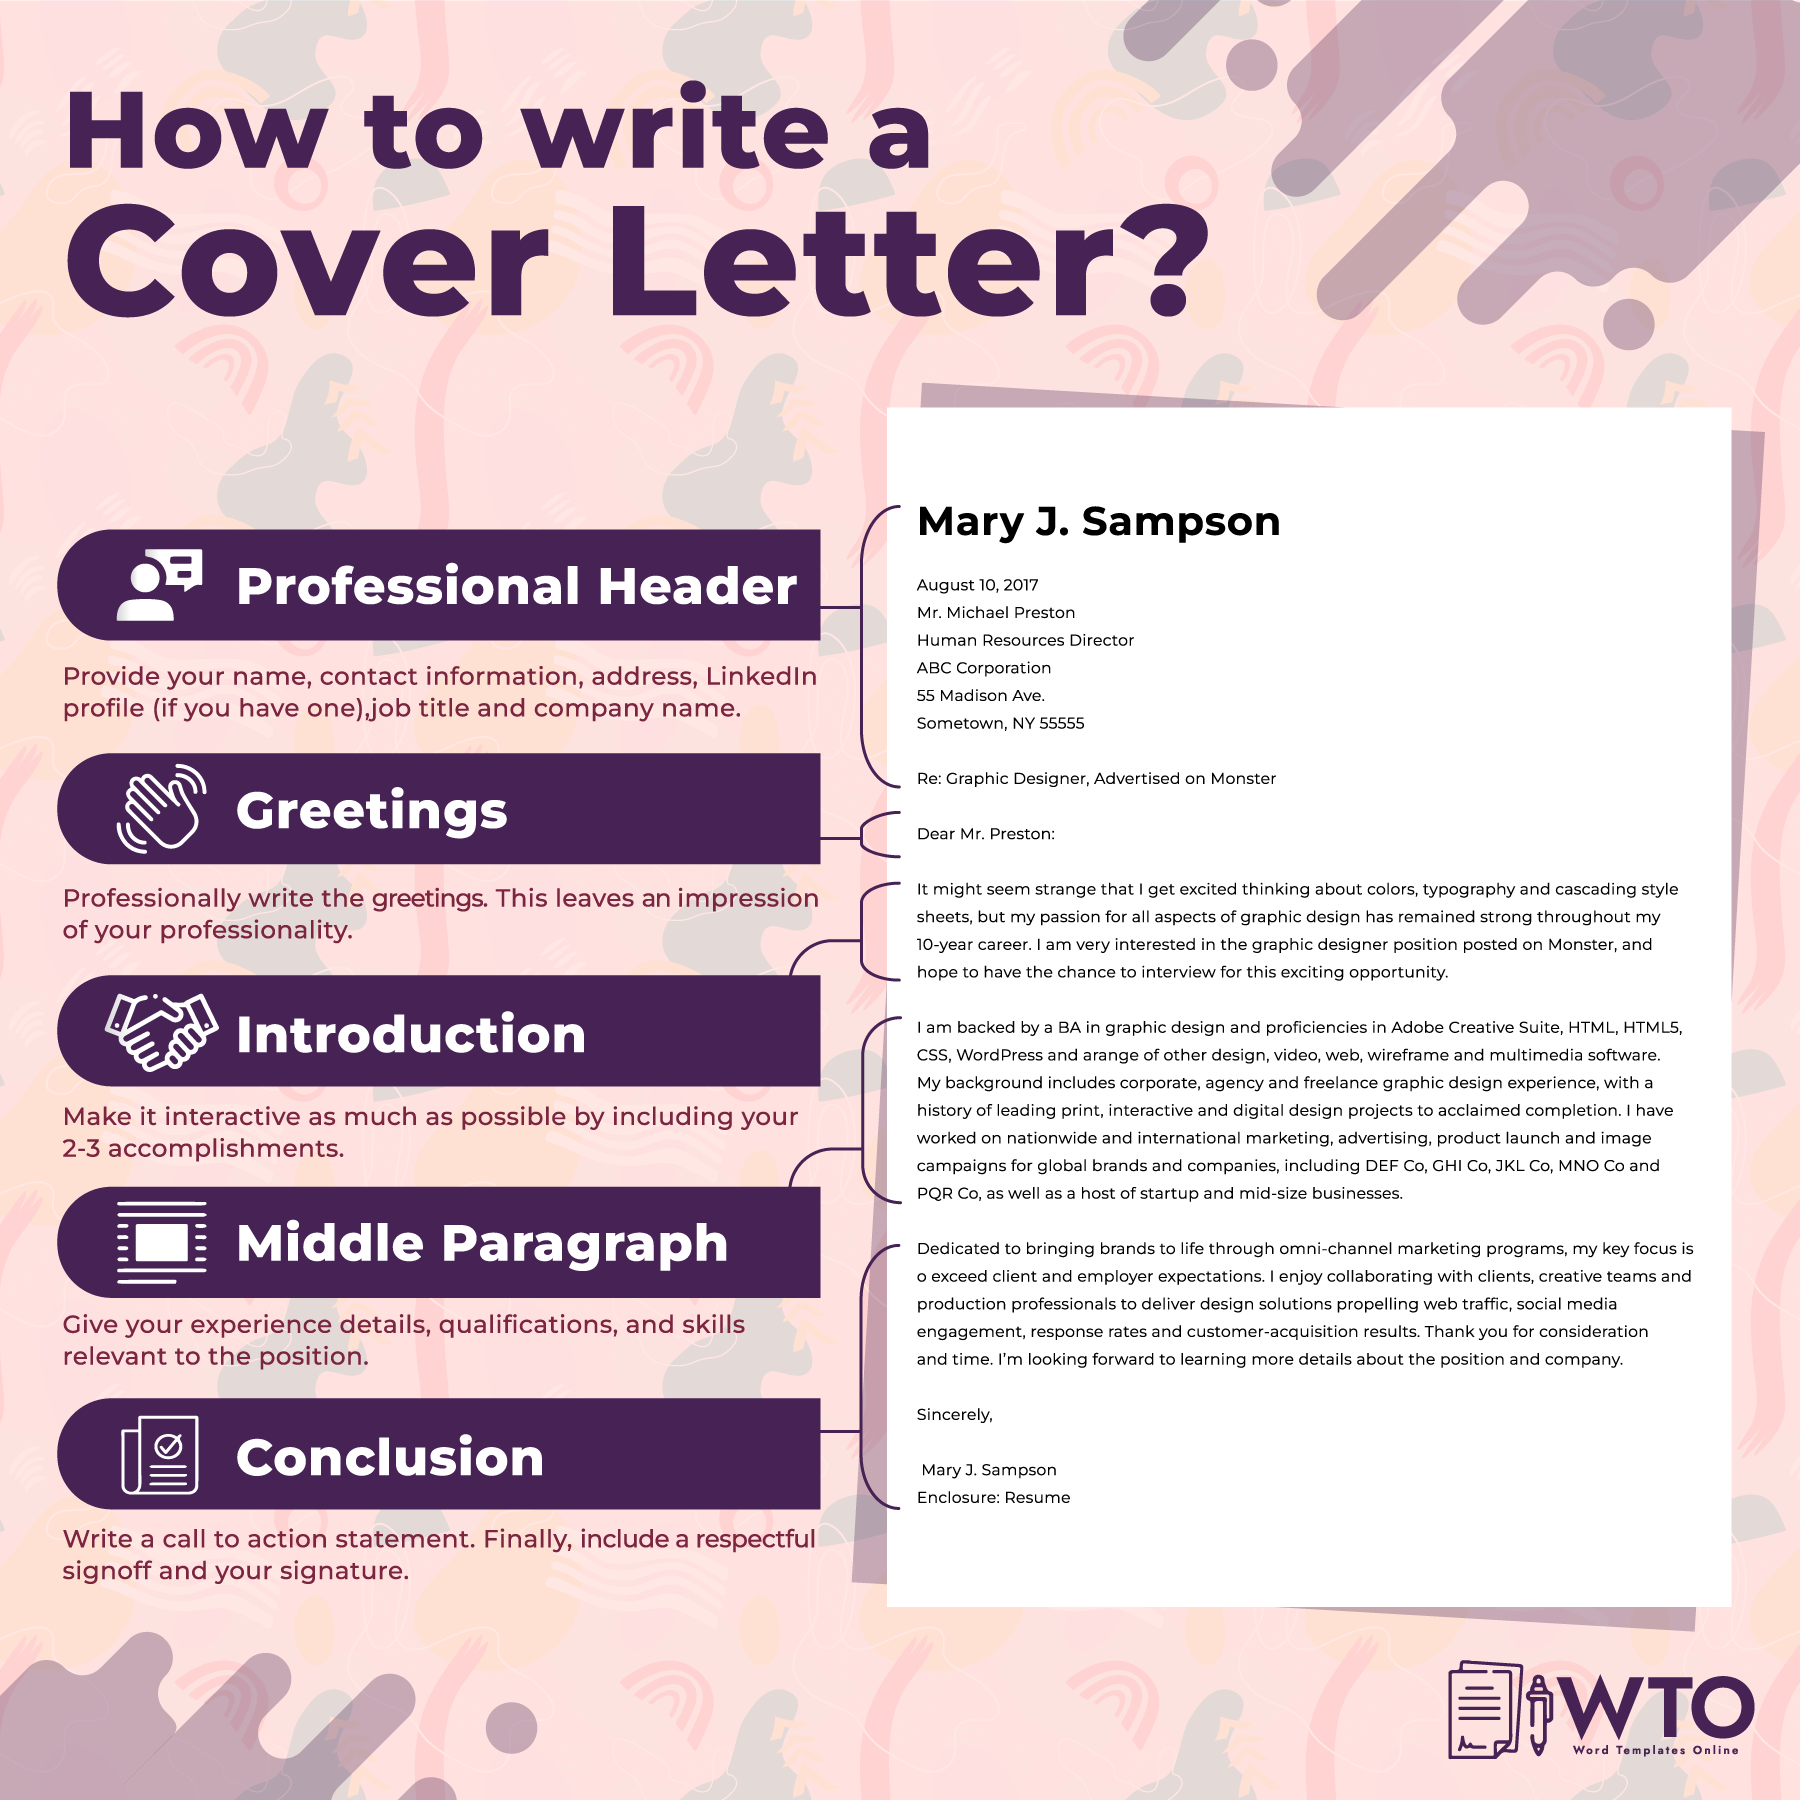 This infographic is about how to write a professional job cover letter.